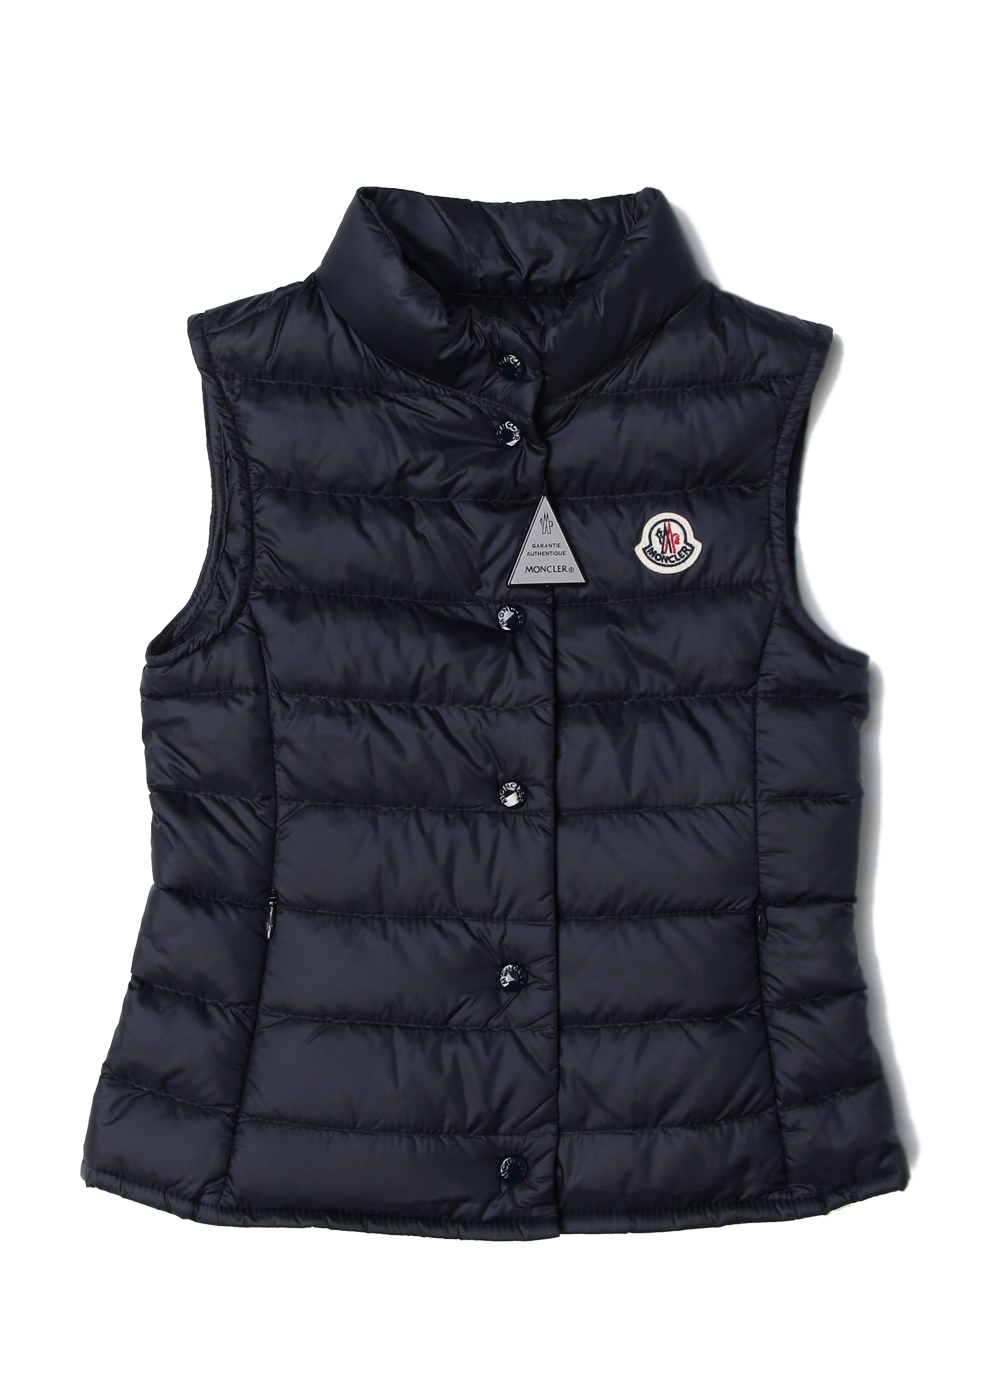 Featured image for “Moncler Gilet Liane”